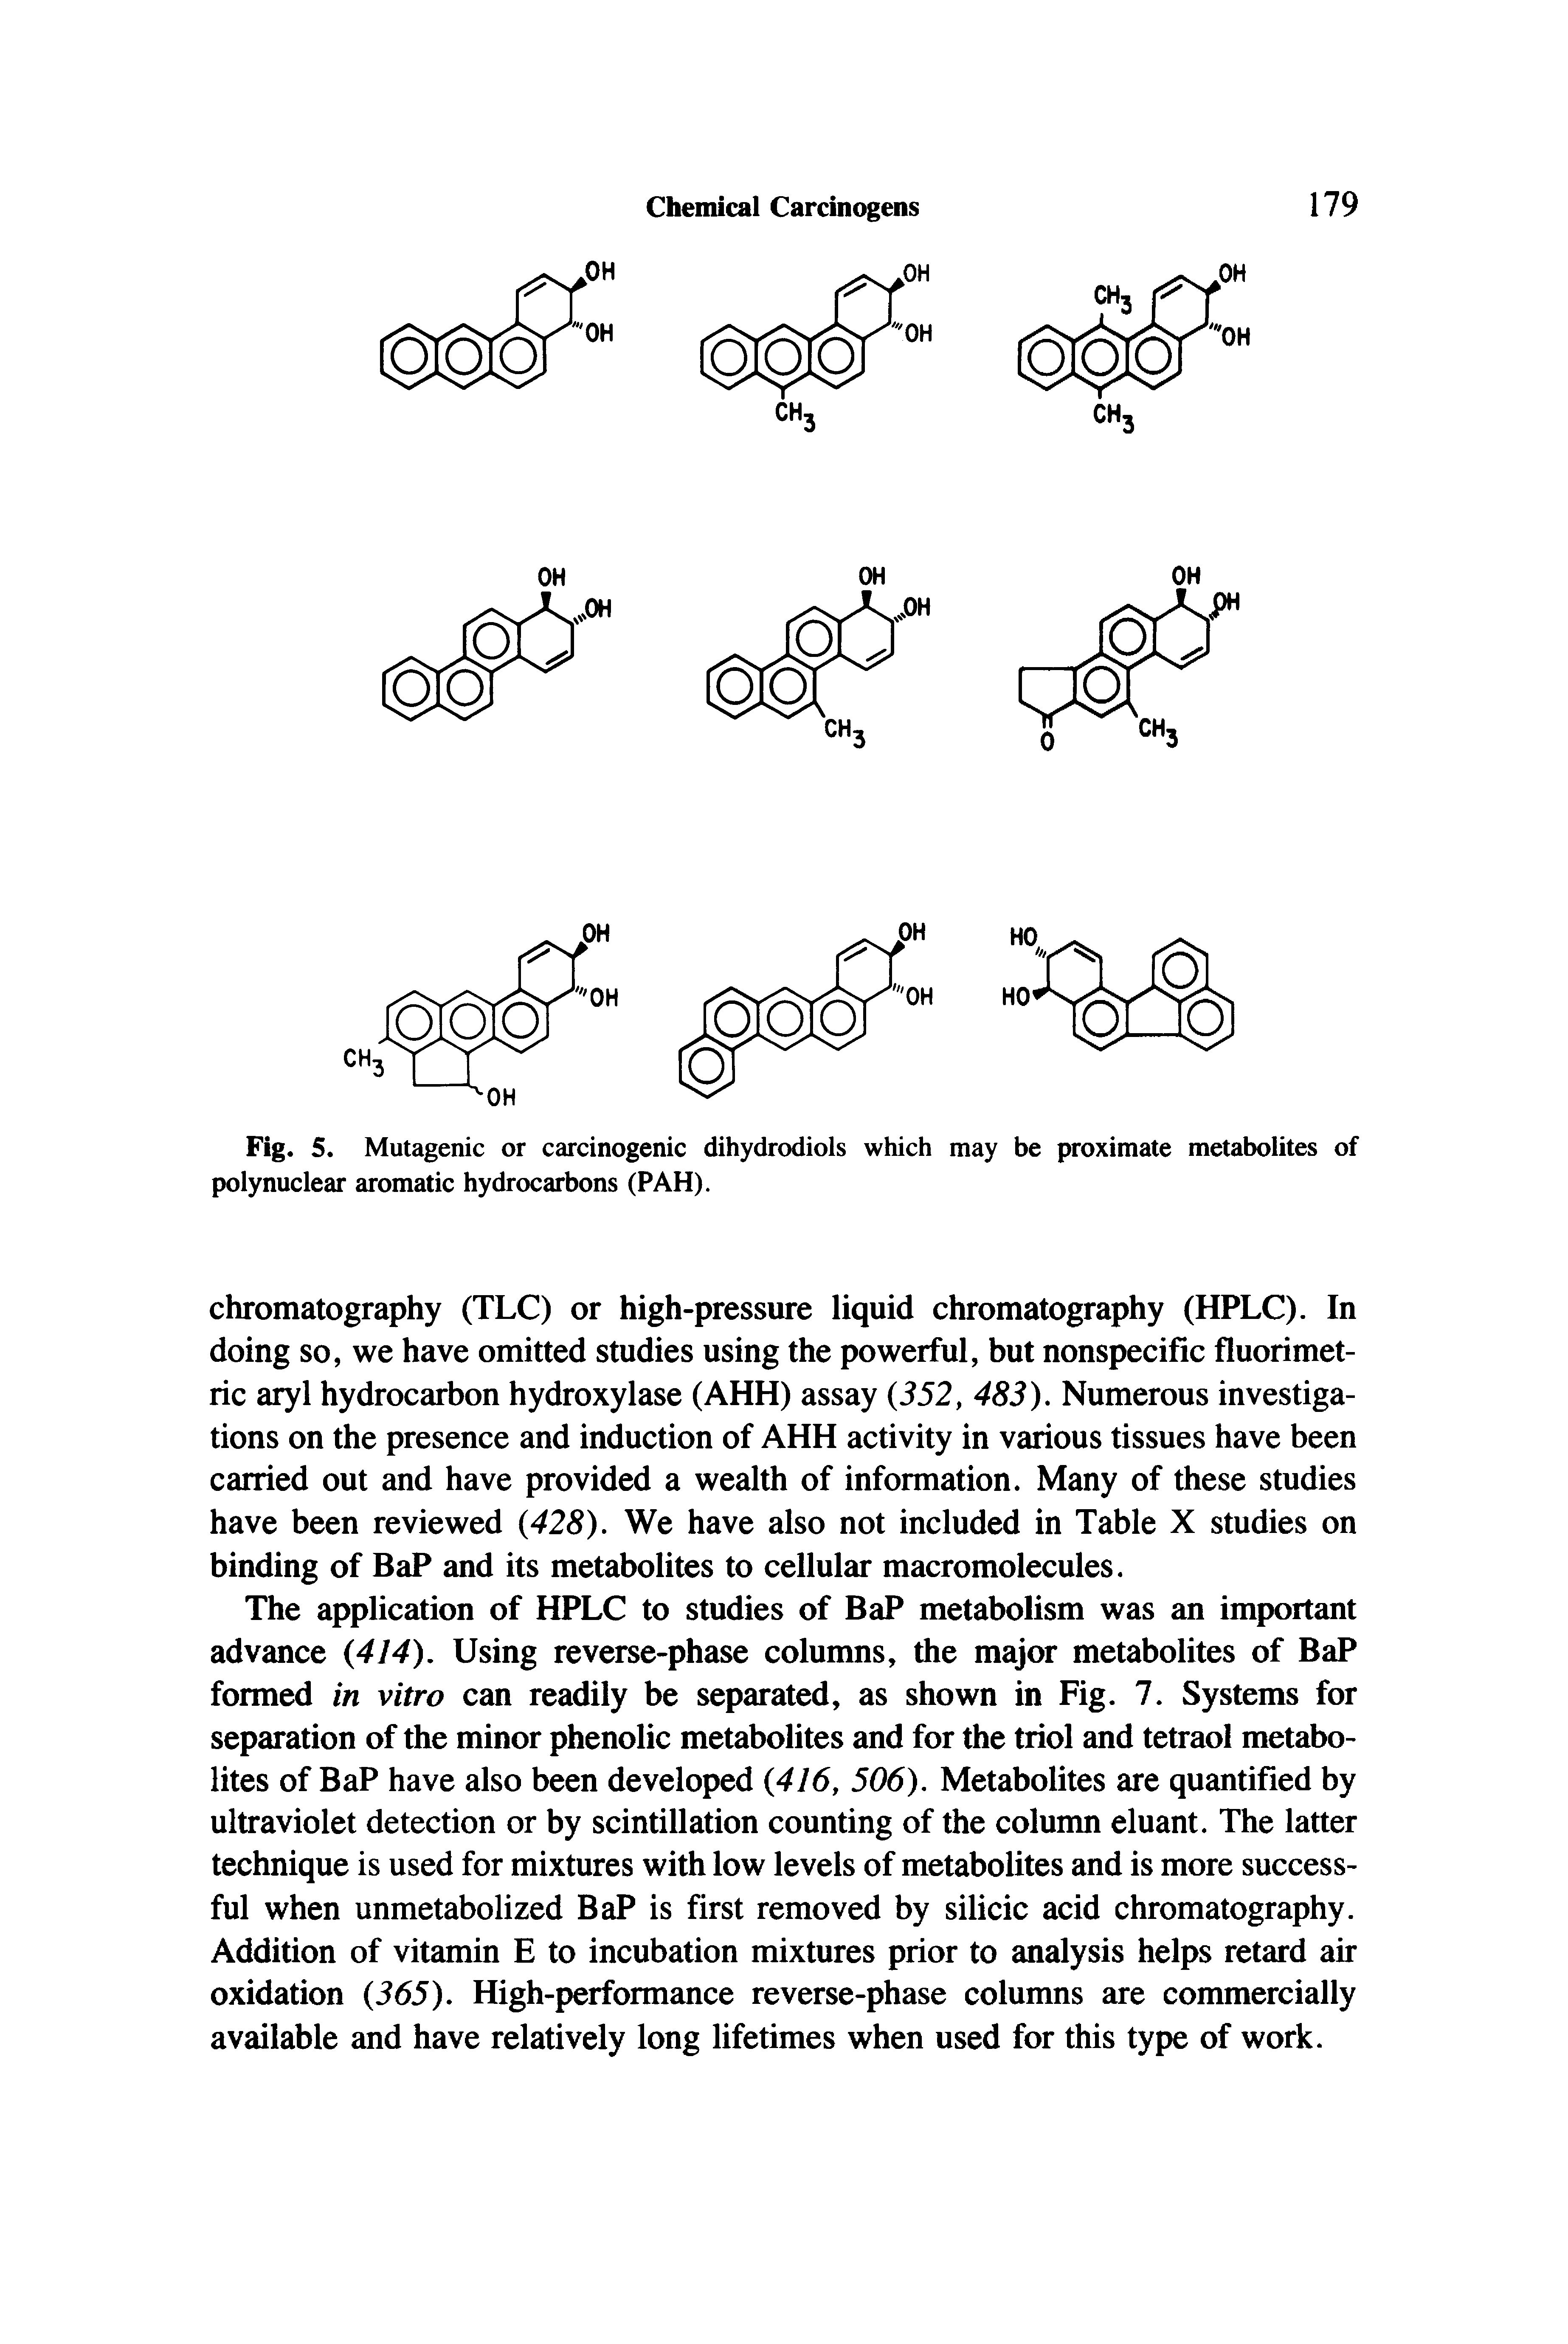 Fig. 5. Mutagenic or carcinogenic dihydrodiols which may be proximate metabolites of polynuclear aromatic hydrocarbons (PAH).